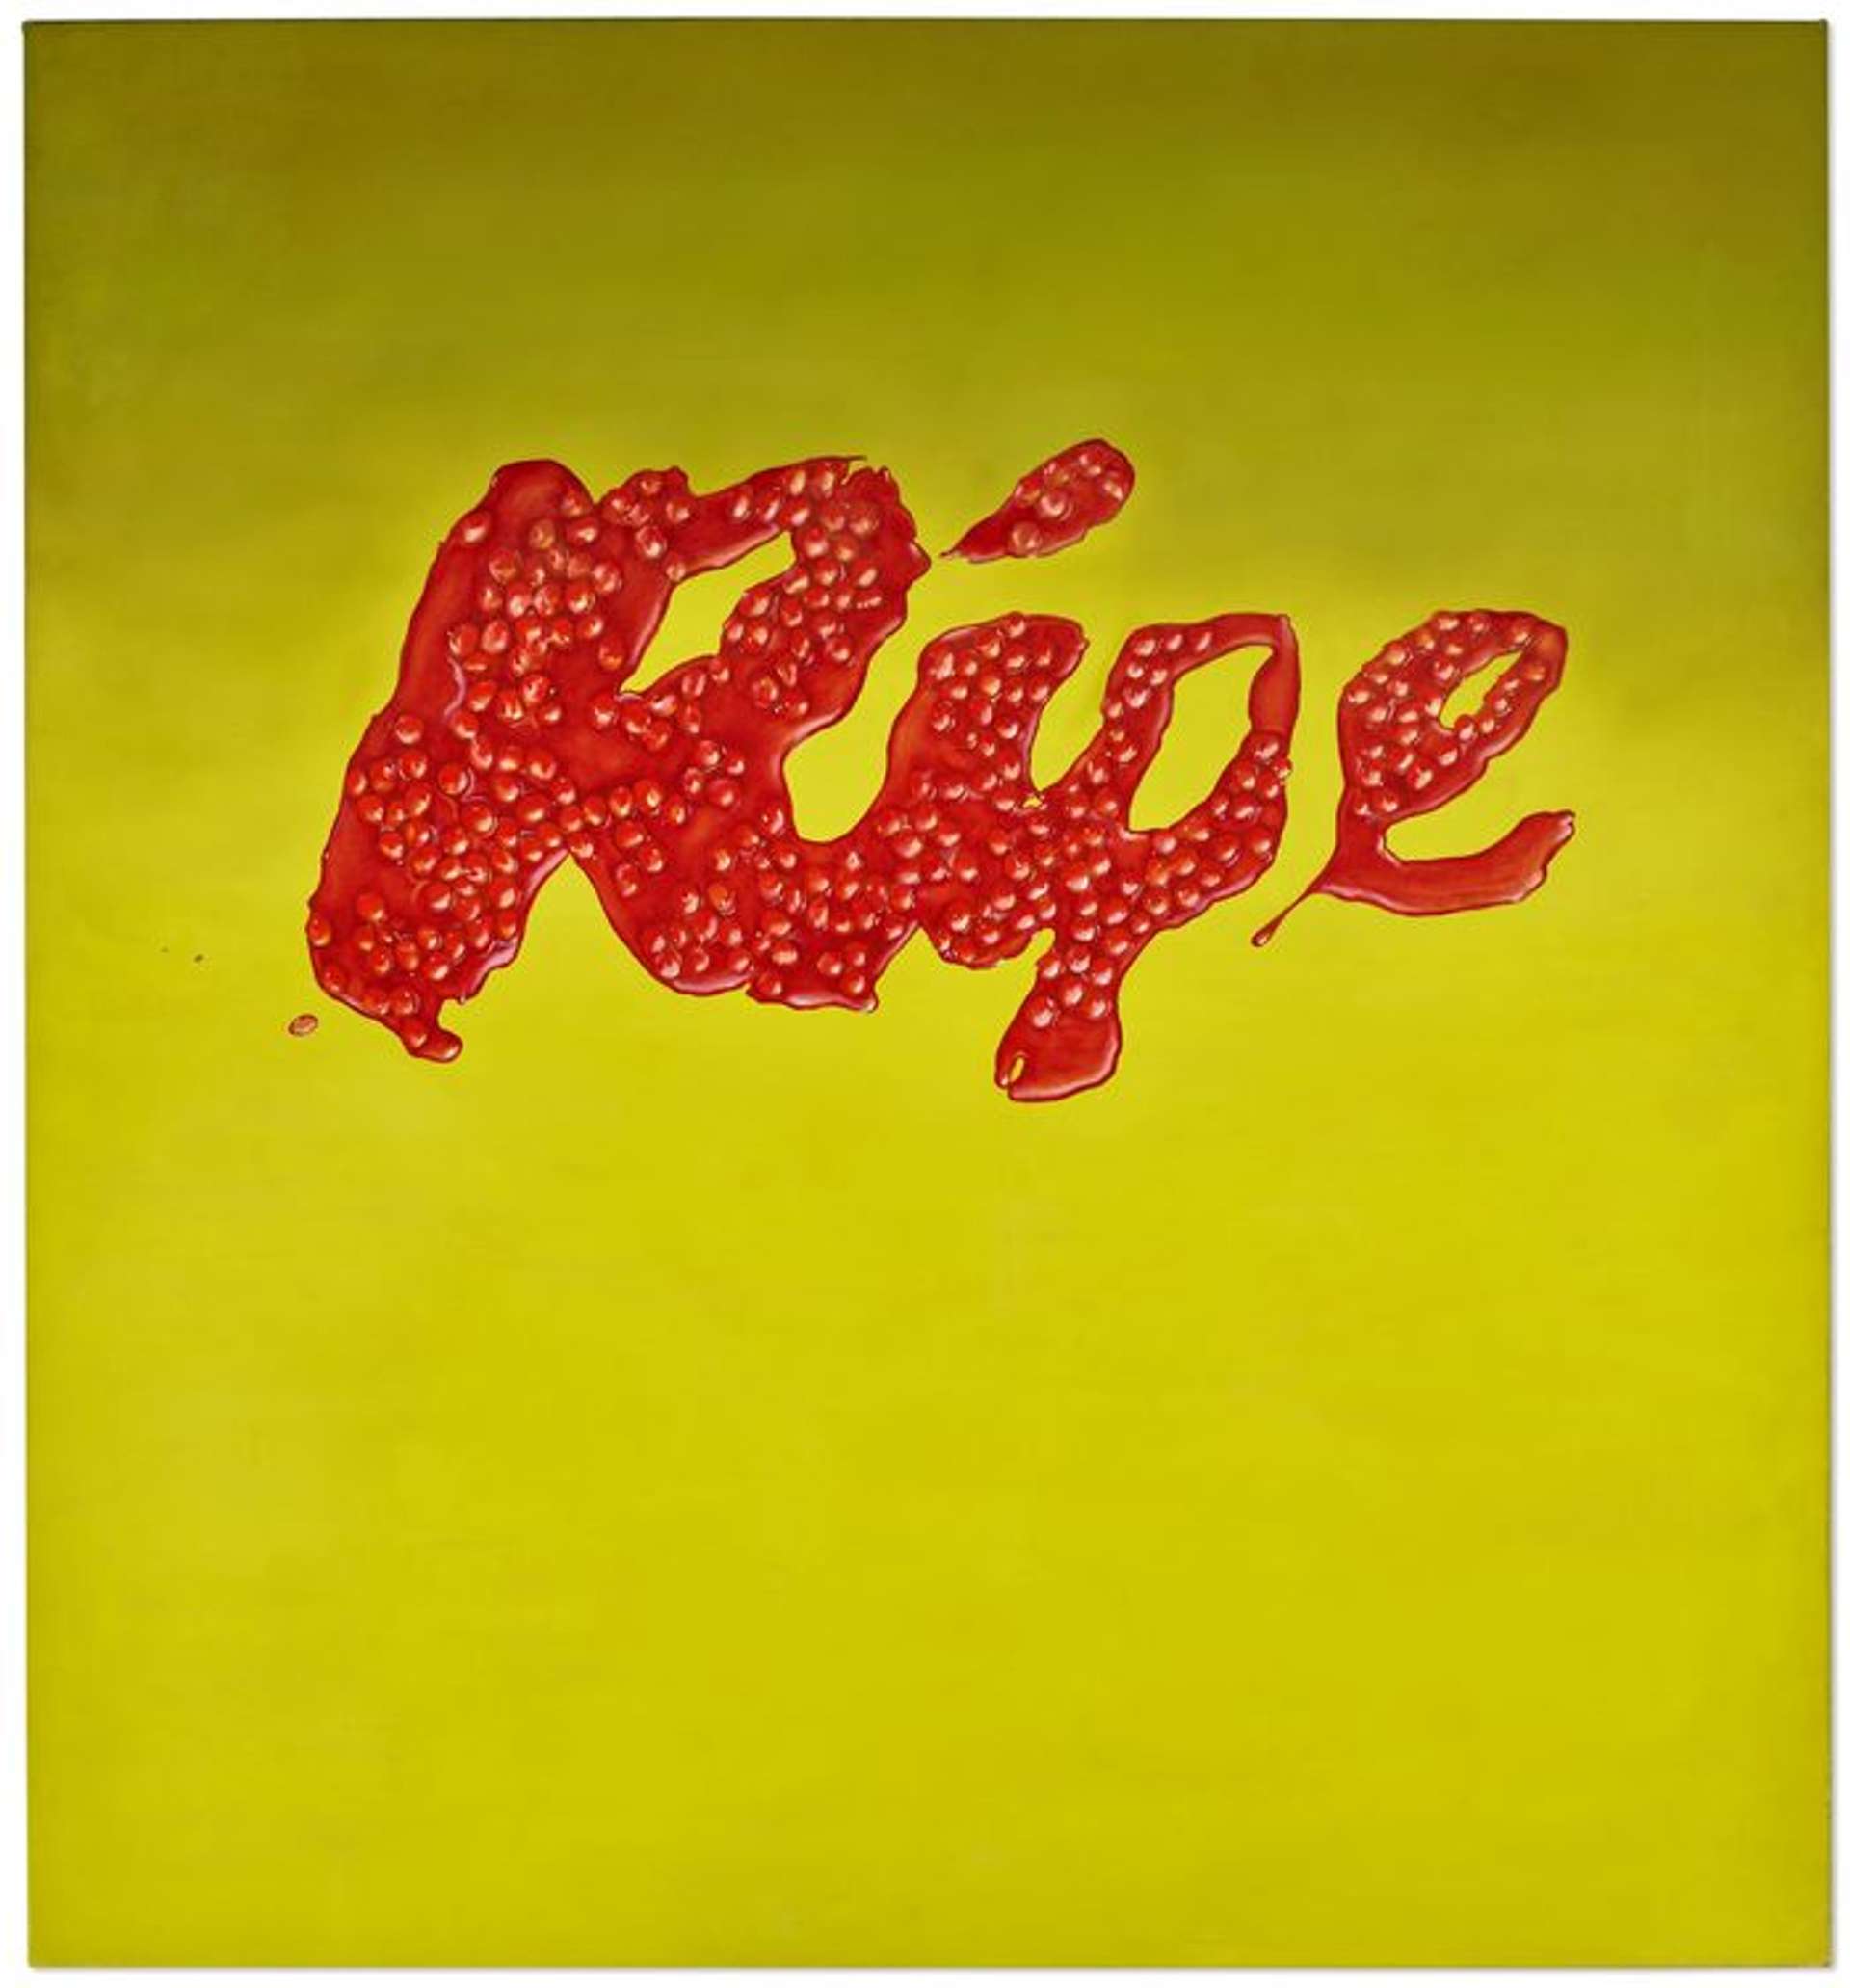 A silkscreen print titled "Ripe" by Ed Ruscha featuring the word "RIPE" in red letters against a vibrant orange background.